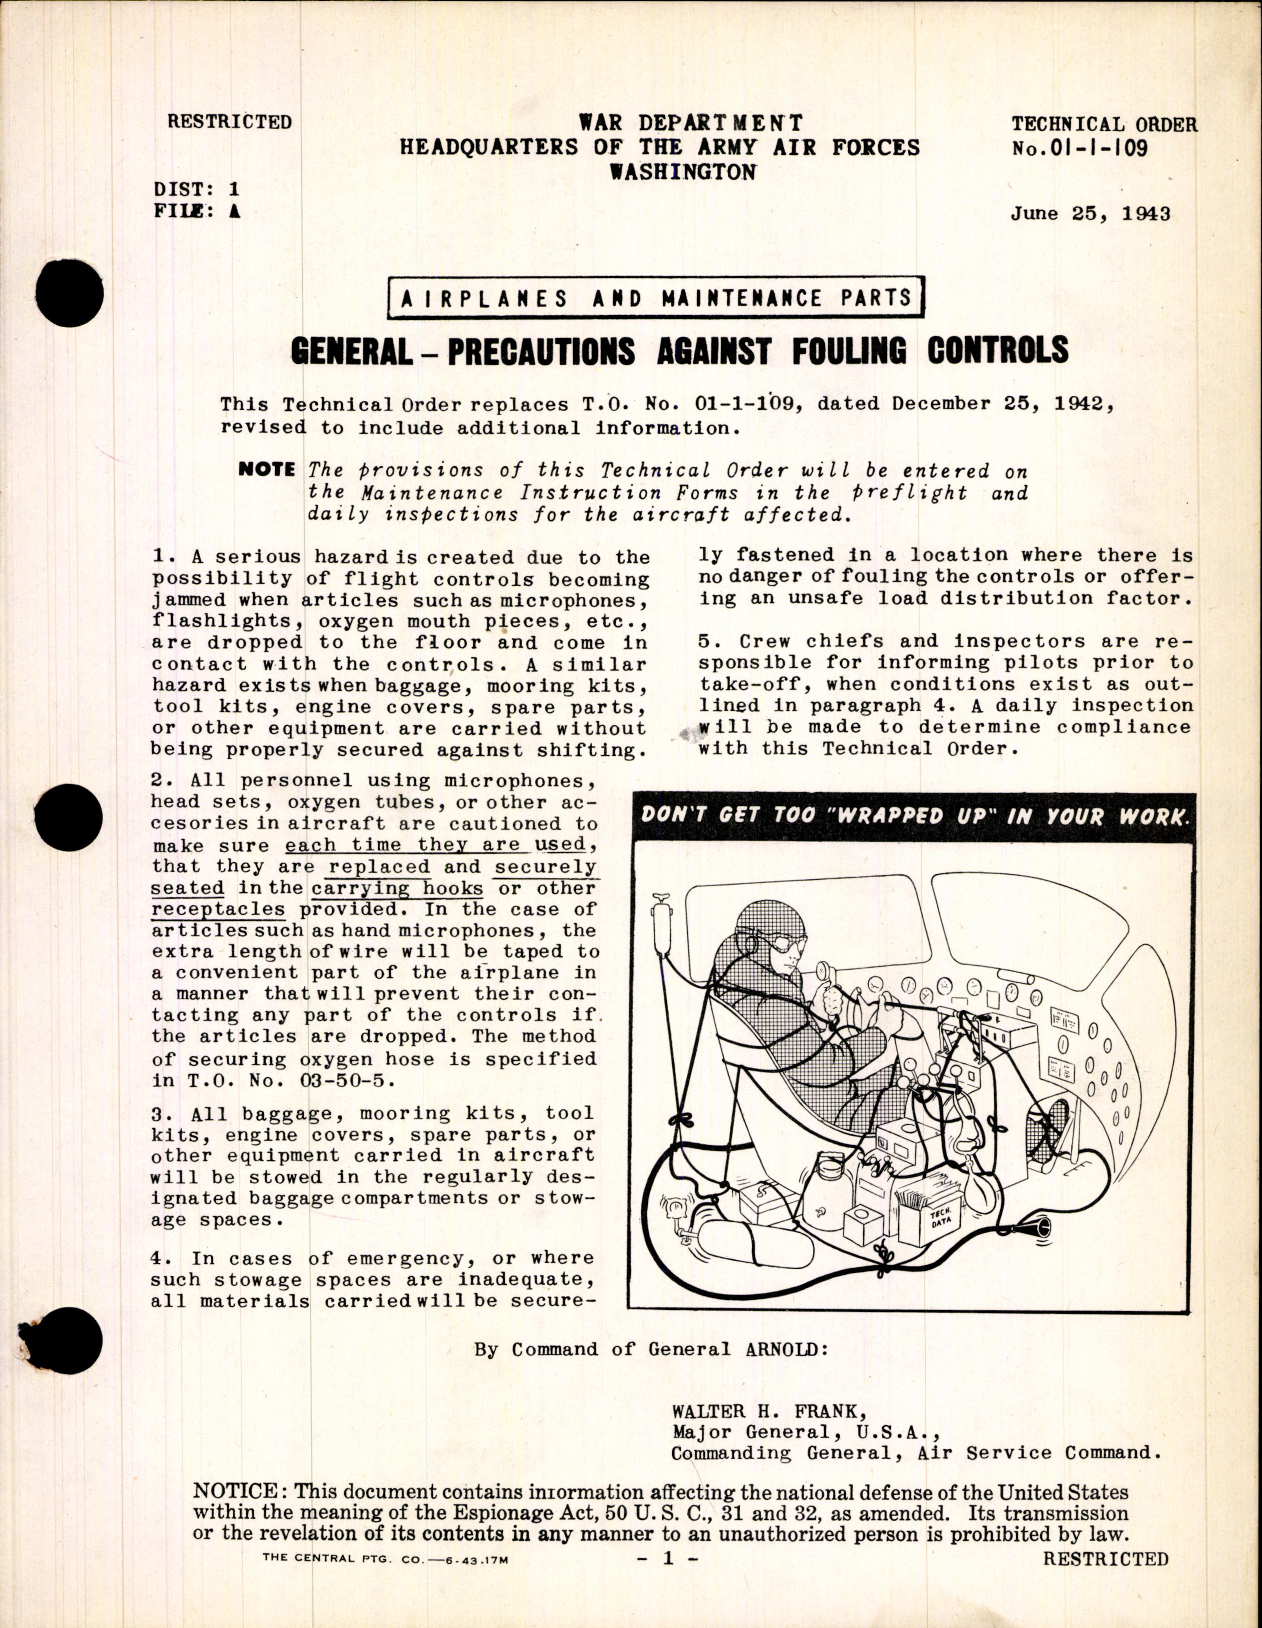 Sample page 1 from AirCorps Library document: Airplanes and Maintenance Parts; Precautions Against Fouling Controls